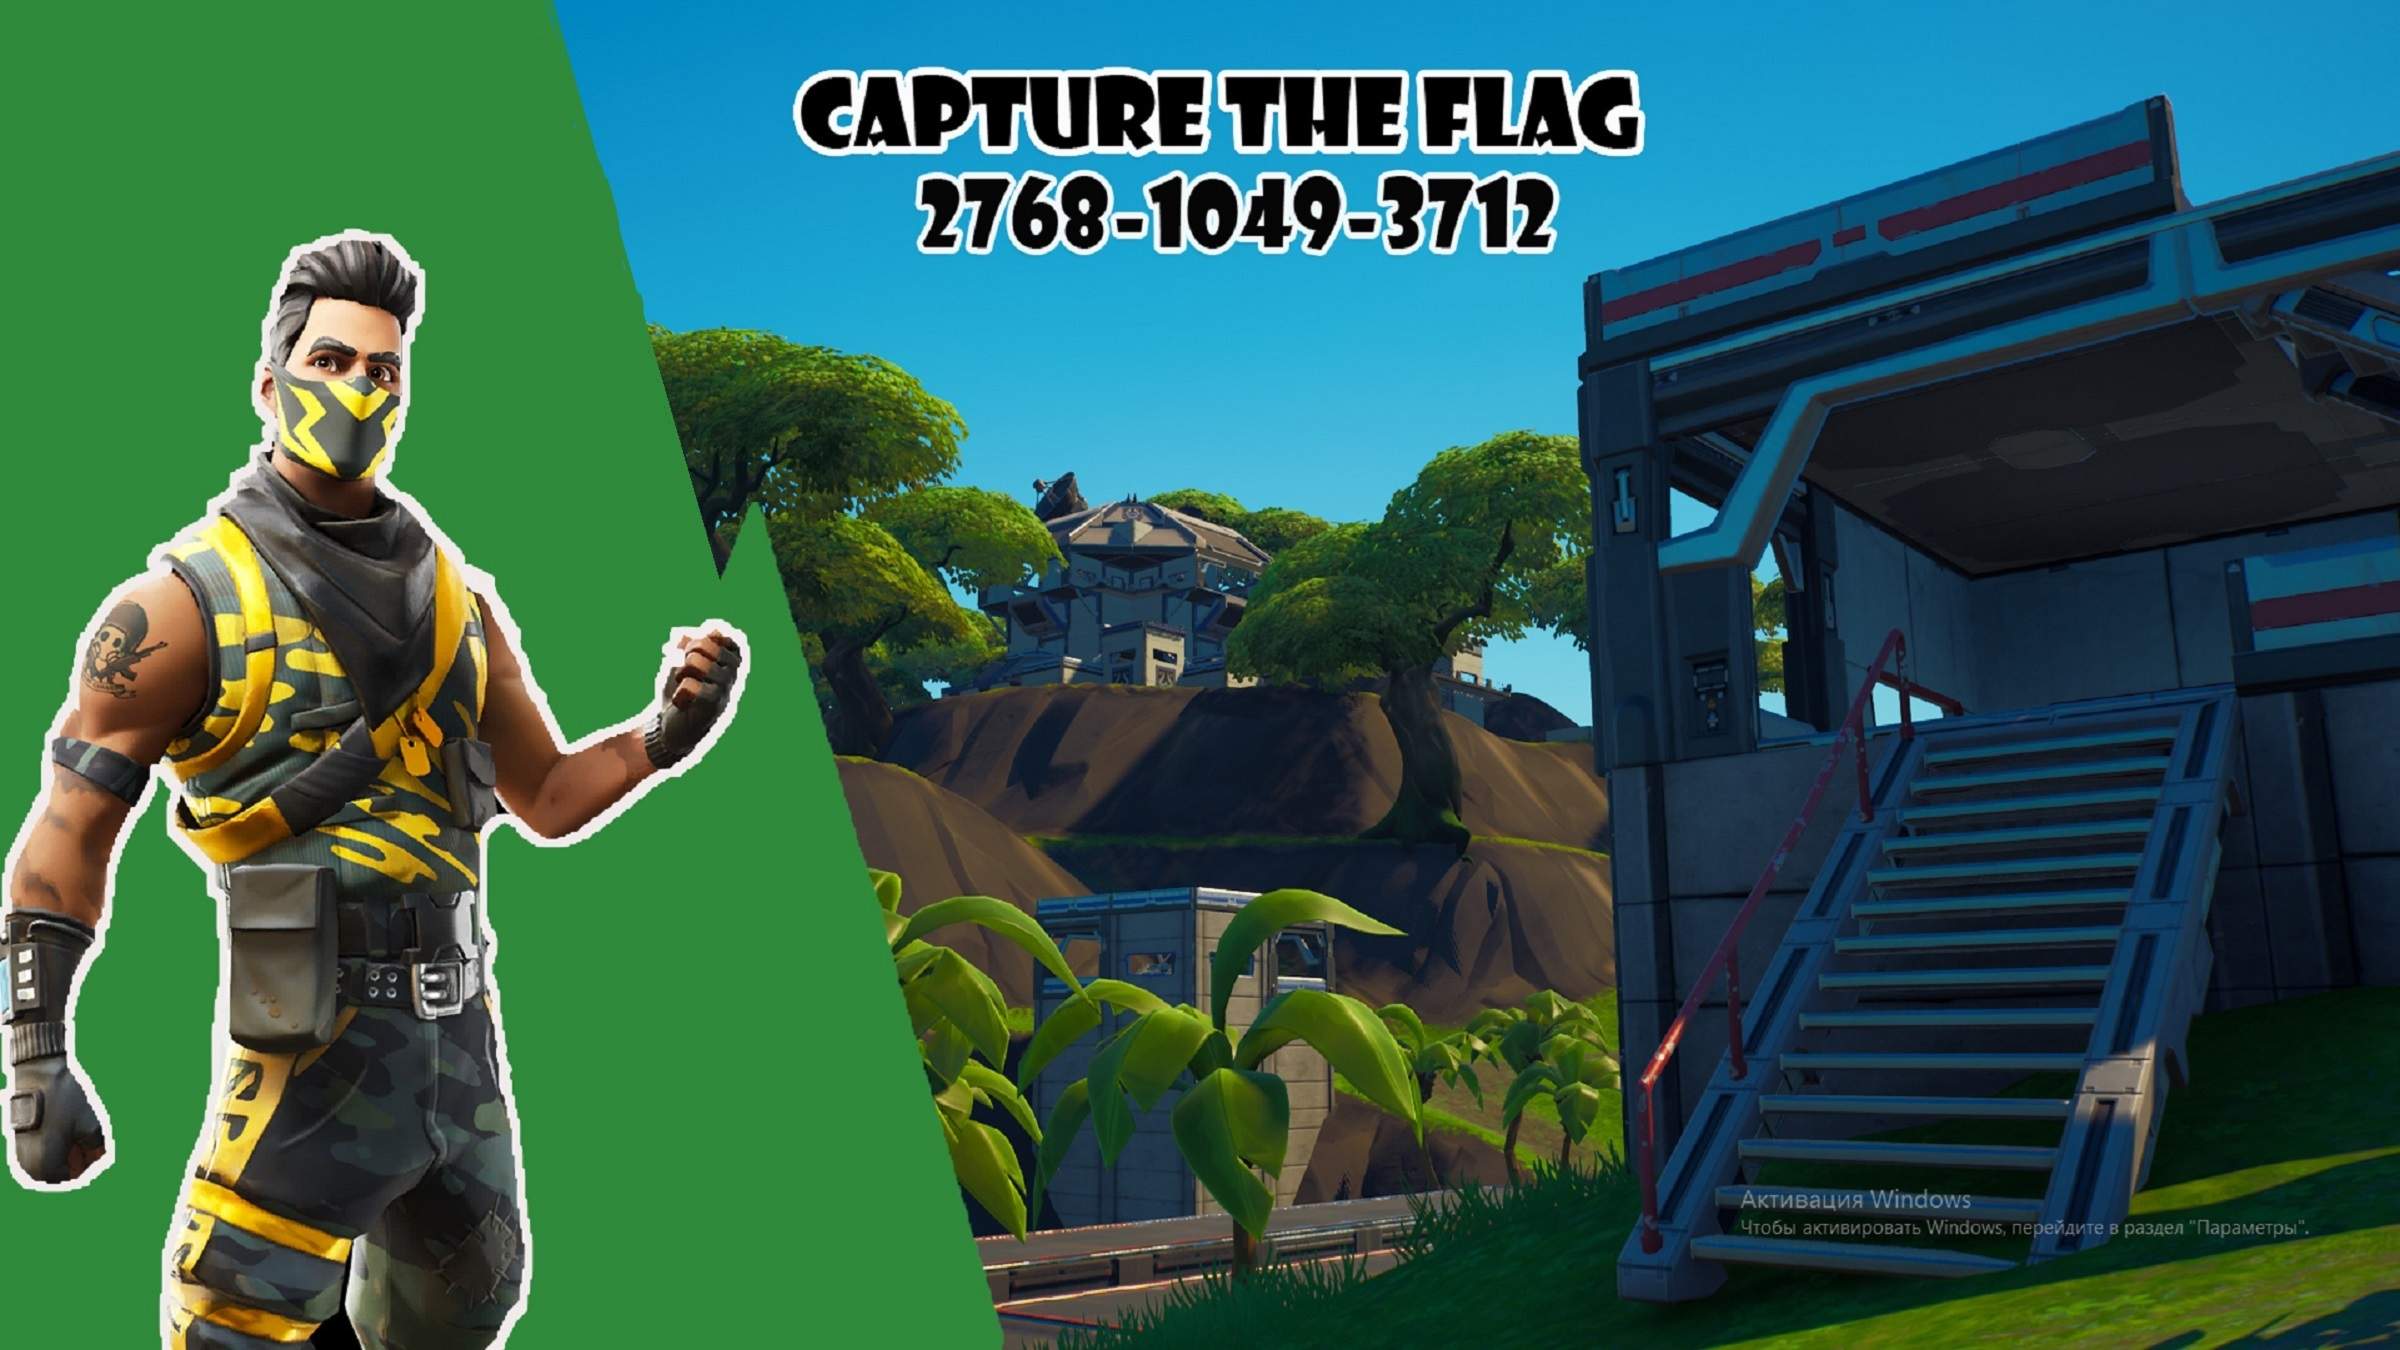 CAPTURE THE FLAG!